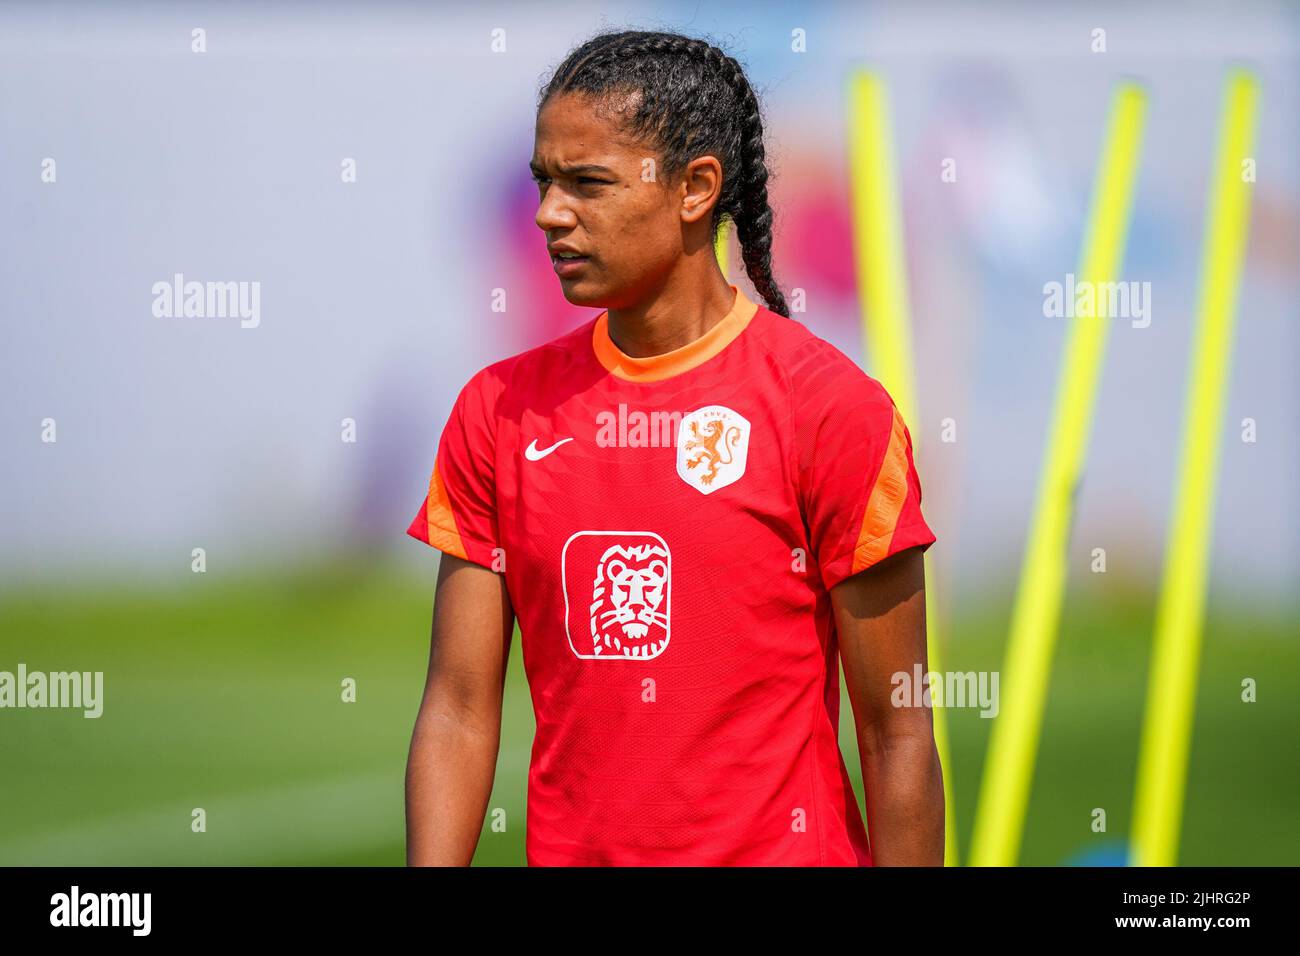 STOCKPORT, UNITED KINGDOM - JULY 20: Esmee Brugts of the Netherlands during a Training Session of Netherlands Women at Stockport County Training Centre on July 20, 2022 in Stockport, United Kingdom. (Photo by Joris Verwijst/Orange Pictures) Stock Photo